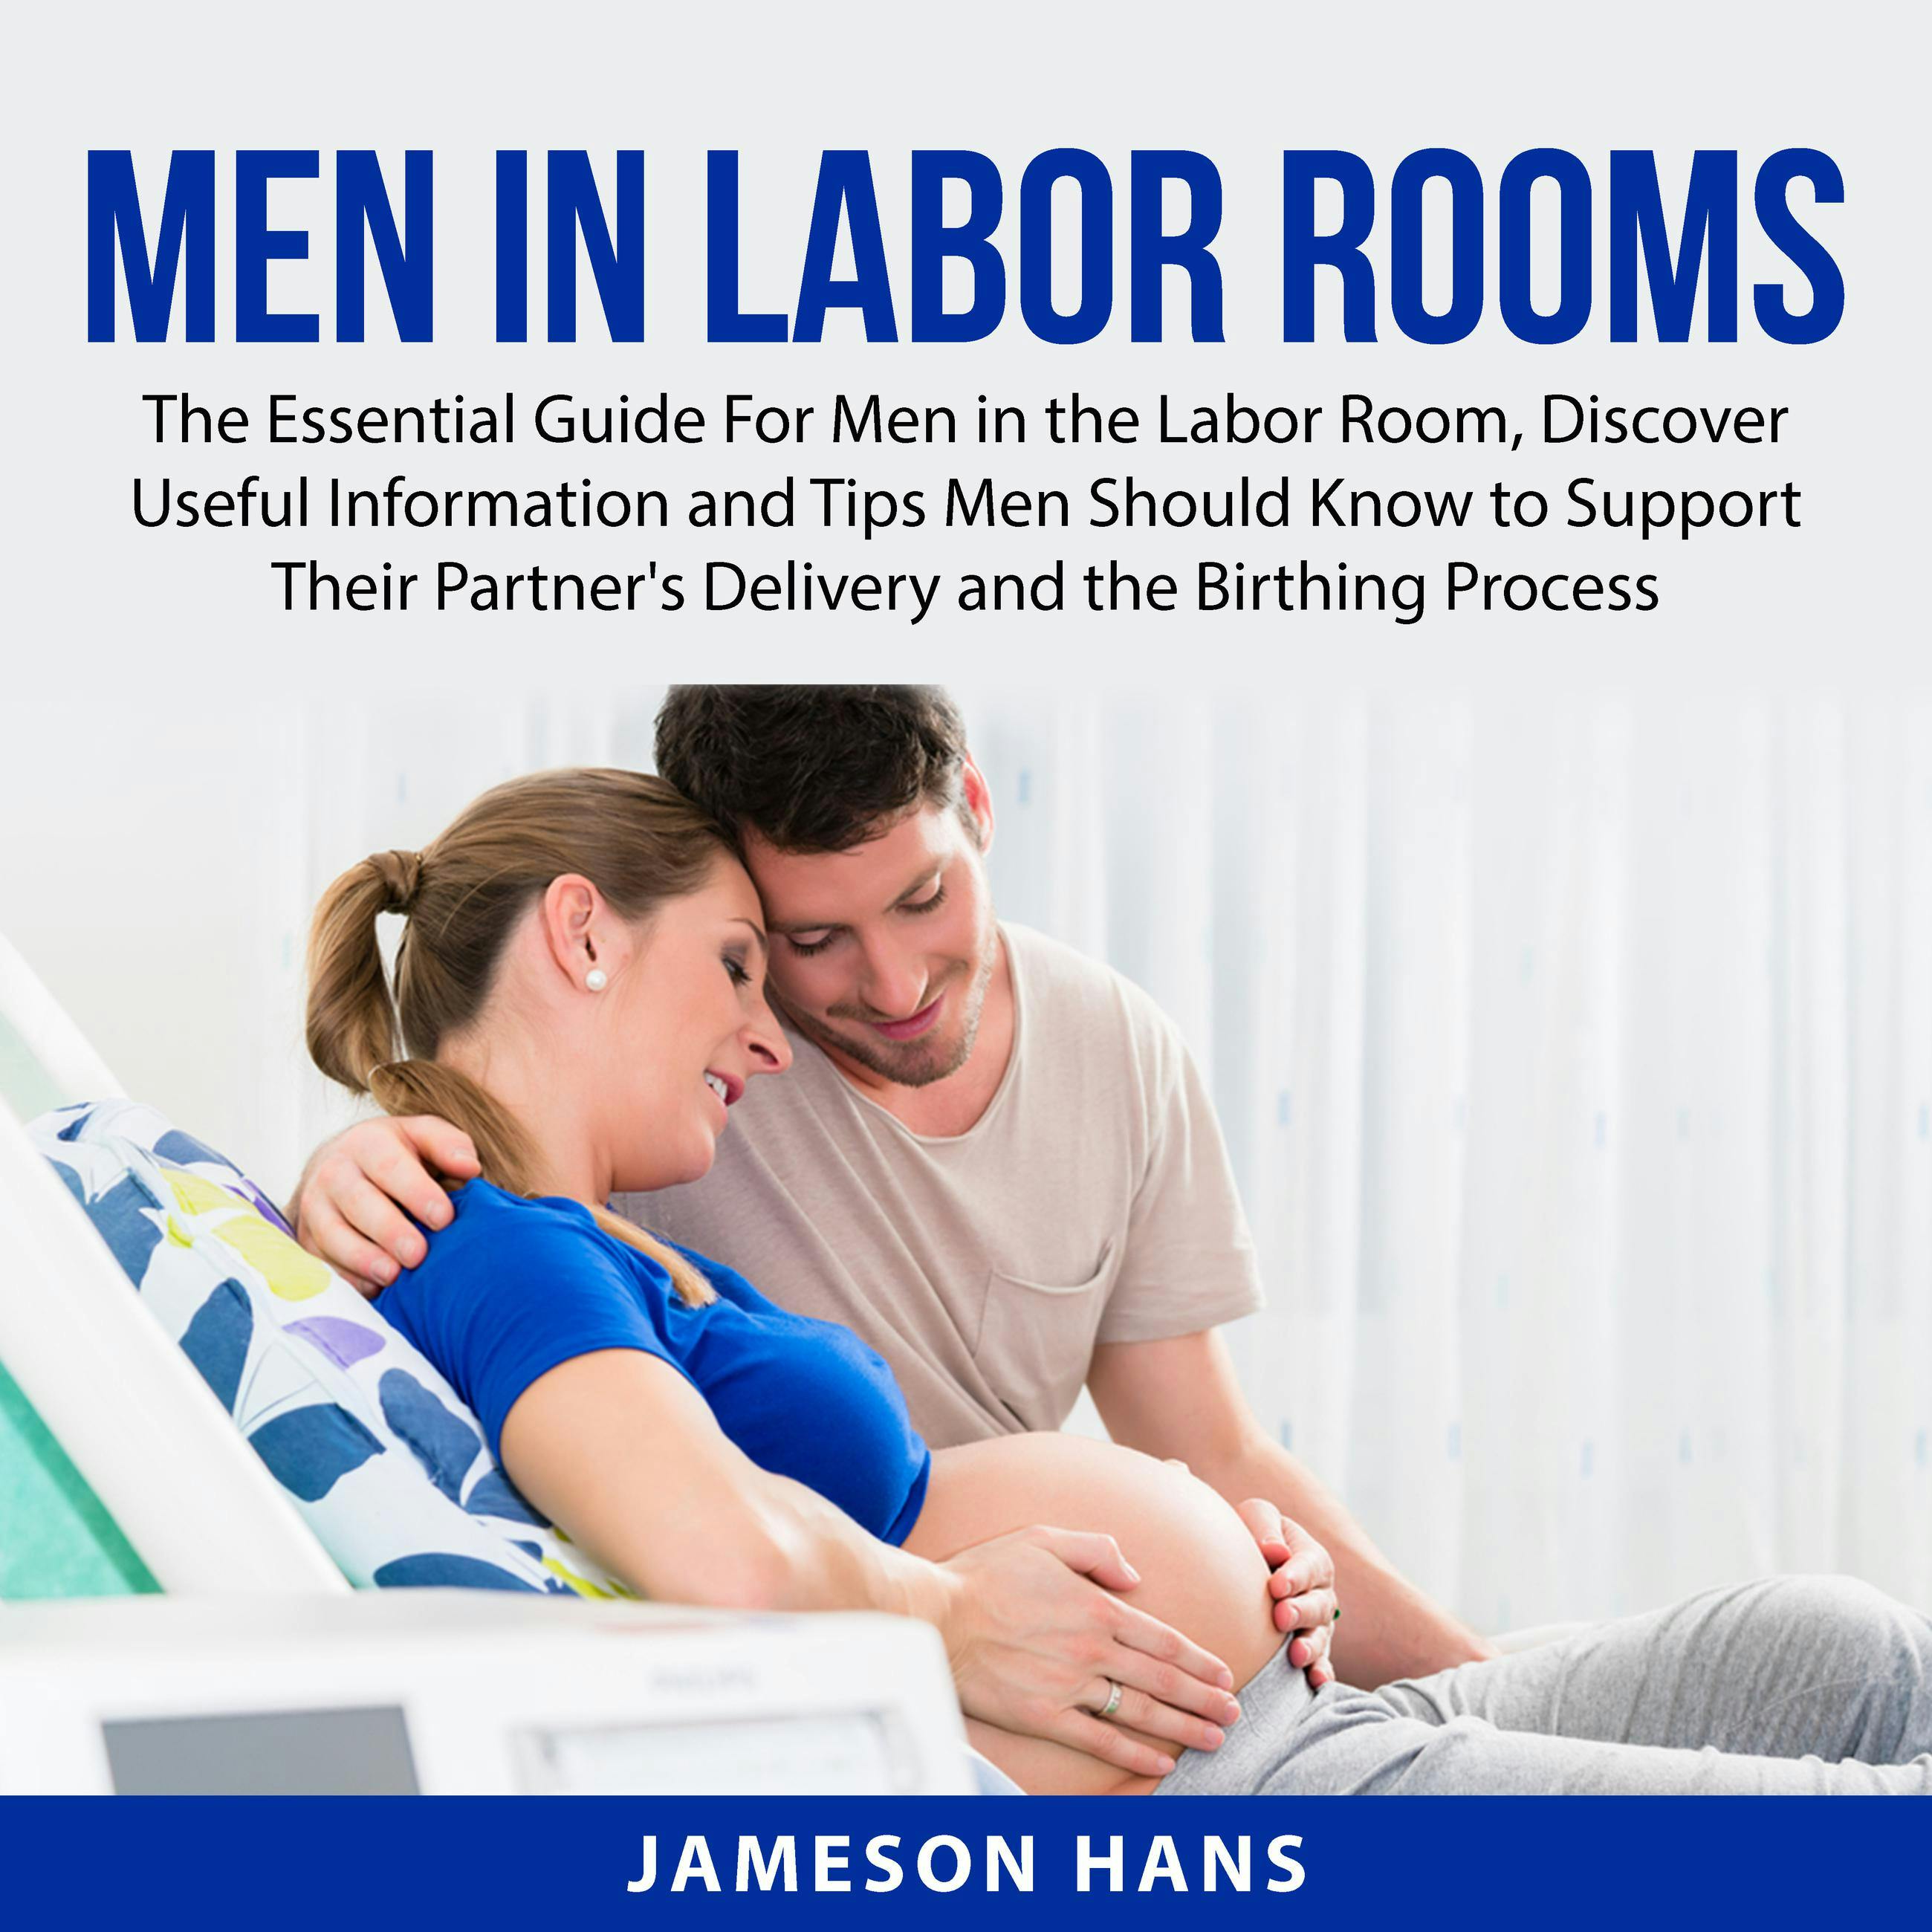 Men in Labor Rooms: The Essential Guide For Men in the Labor Room, Discover Useful Information and Tips Men Should Know to Support Their Partner's Delivery and the Birthing Process - Jameson Hans